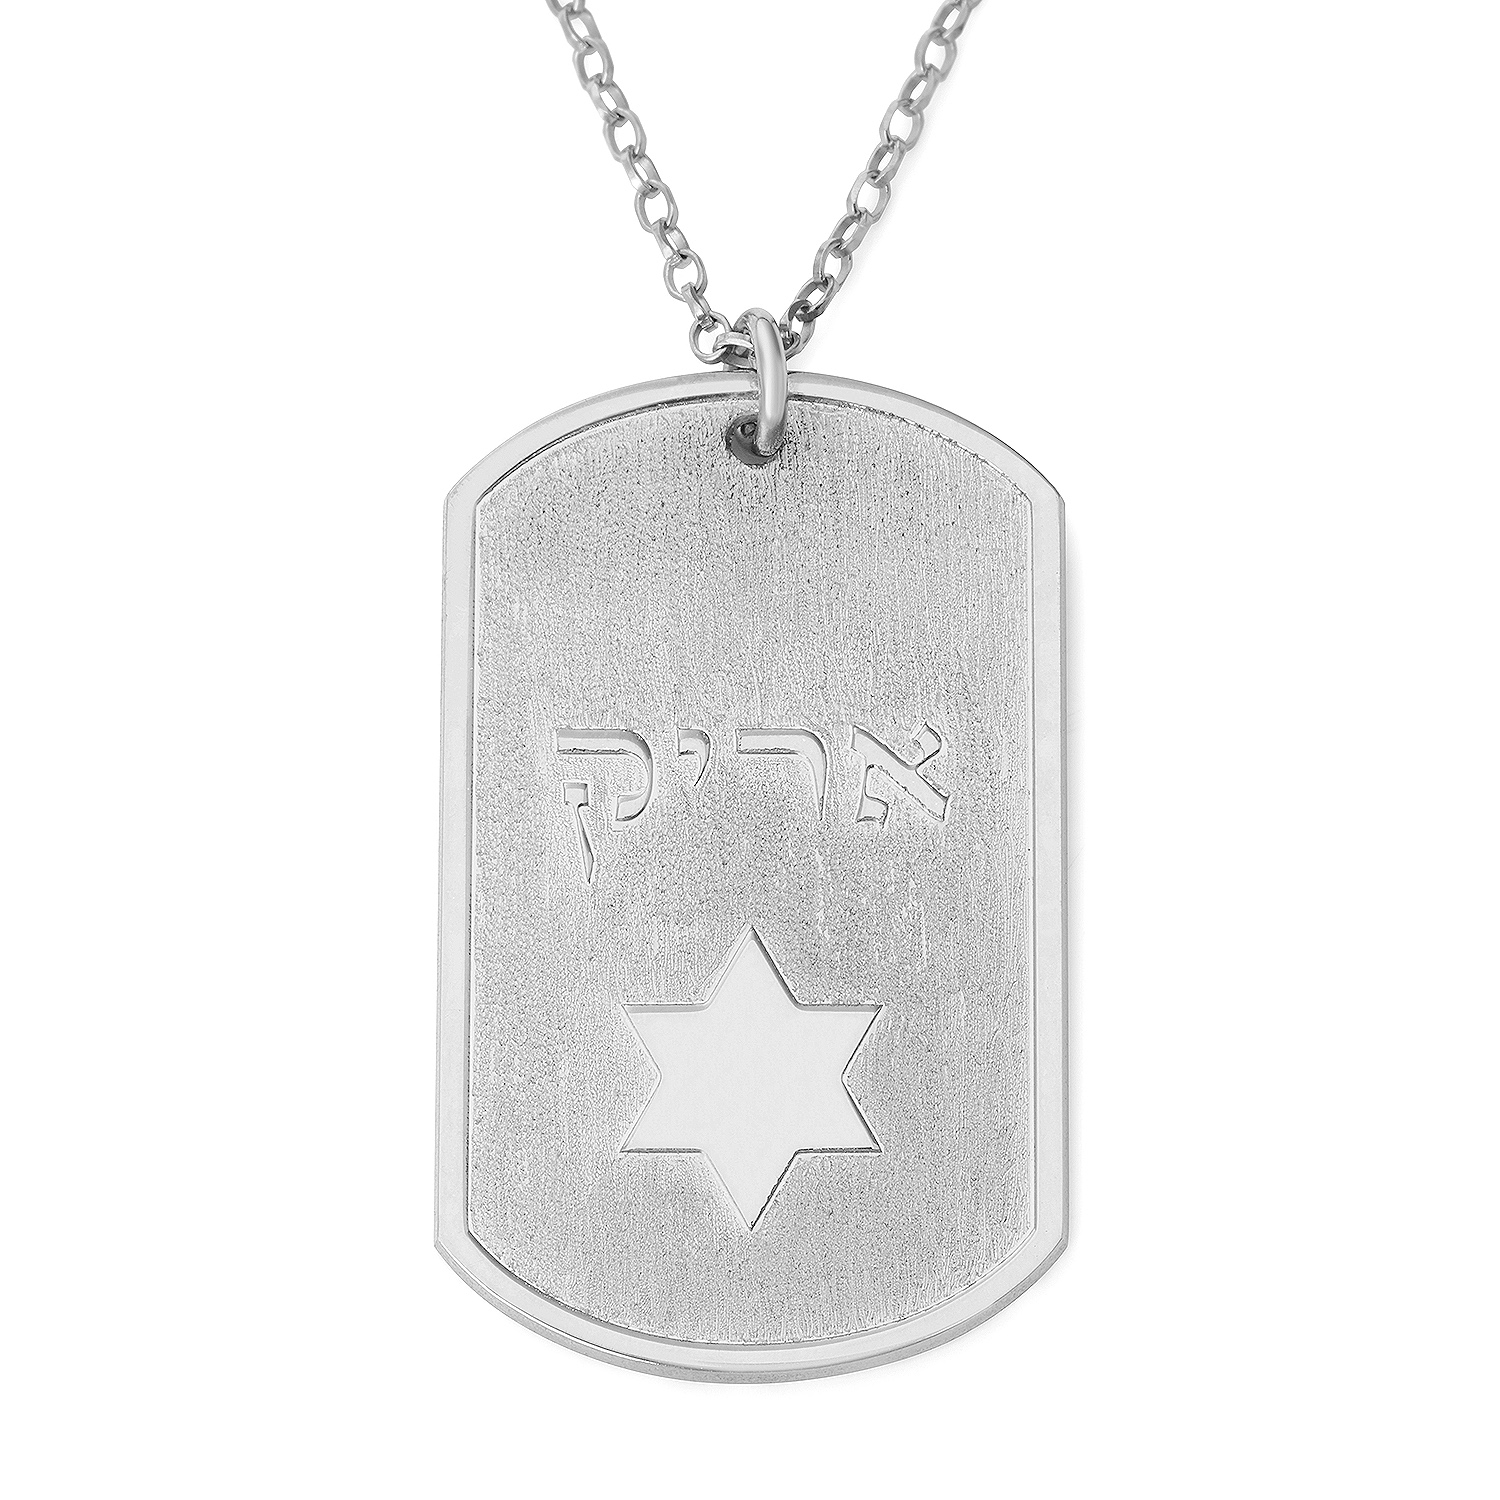 Luxury Thickness Customizable Dog Tag Necklace with Star of David - Color Option - 1